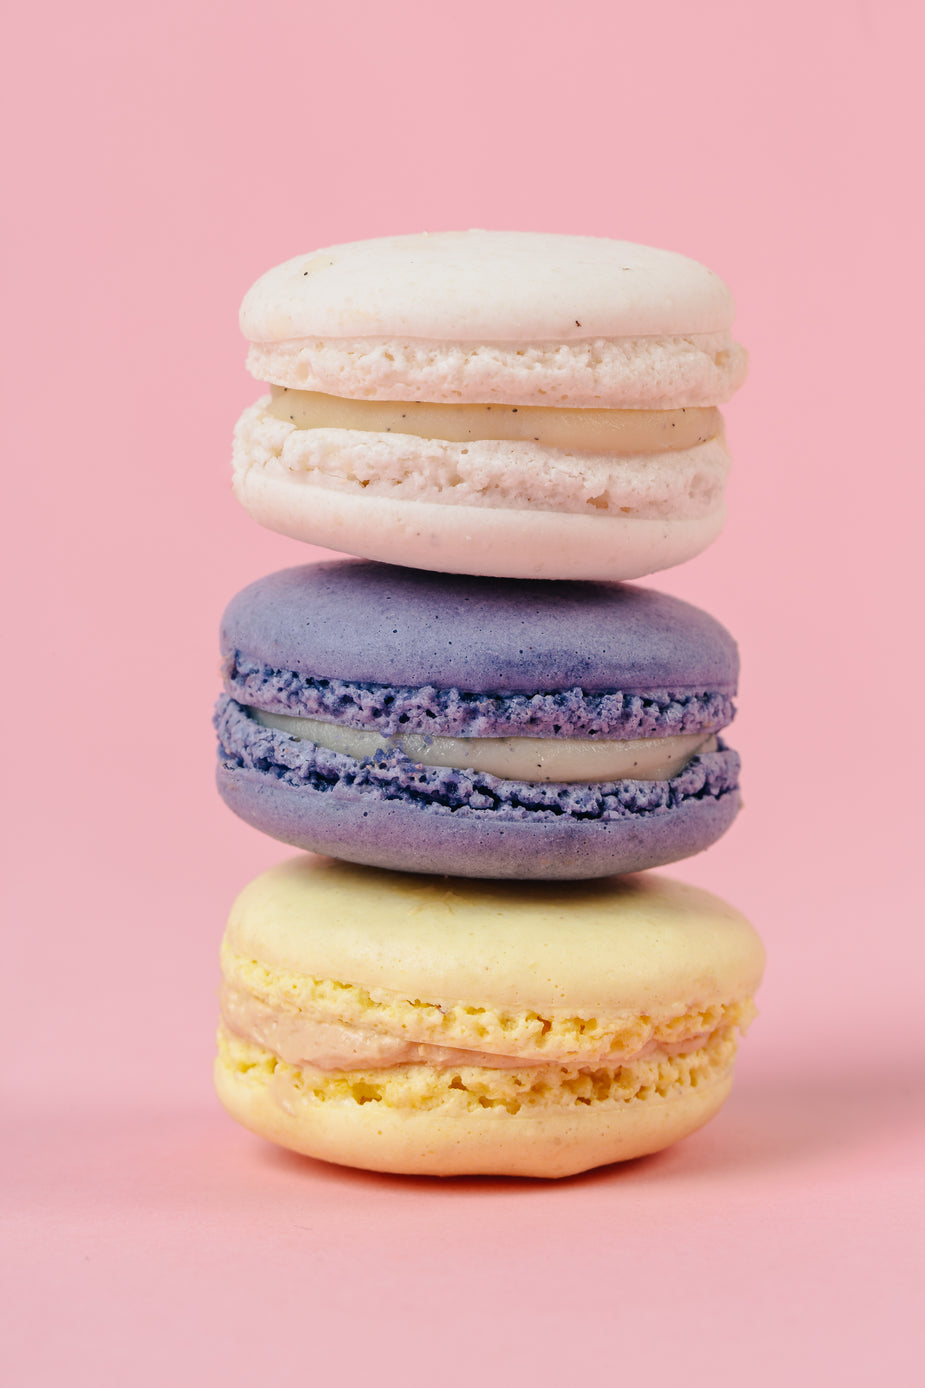 Browse Free HD Images of Yellow Purple And Cream Macarons